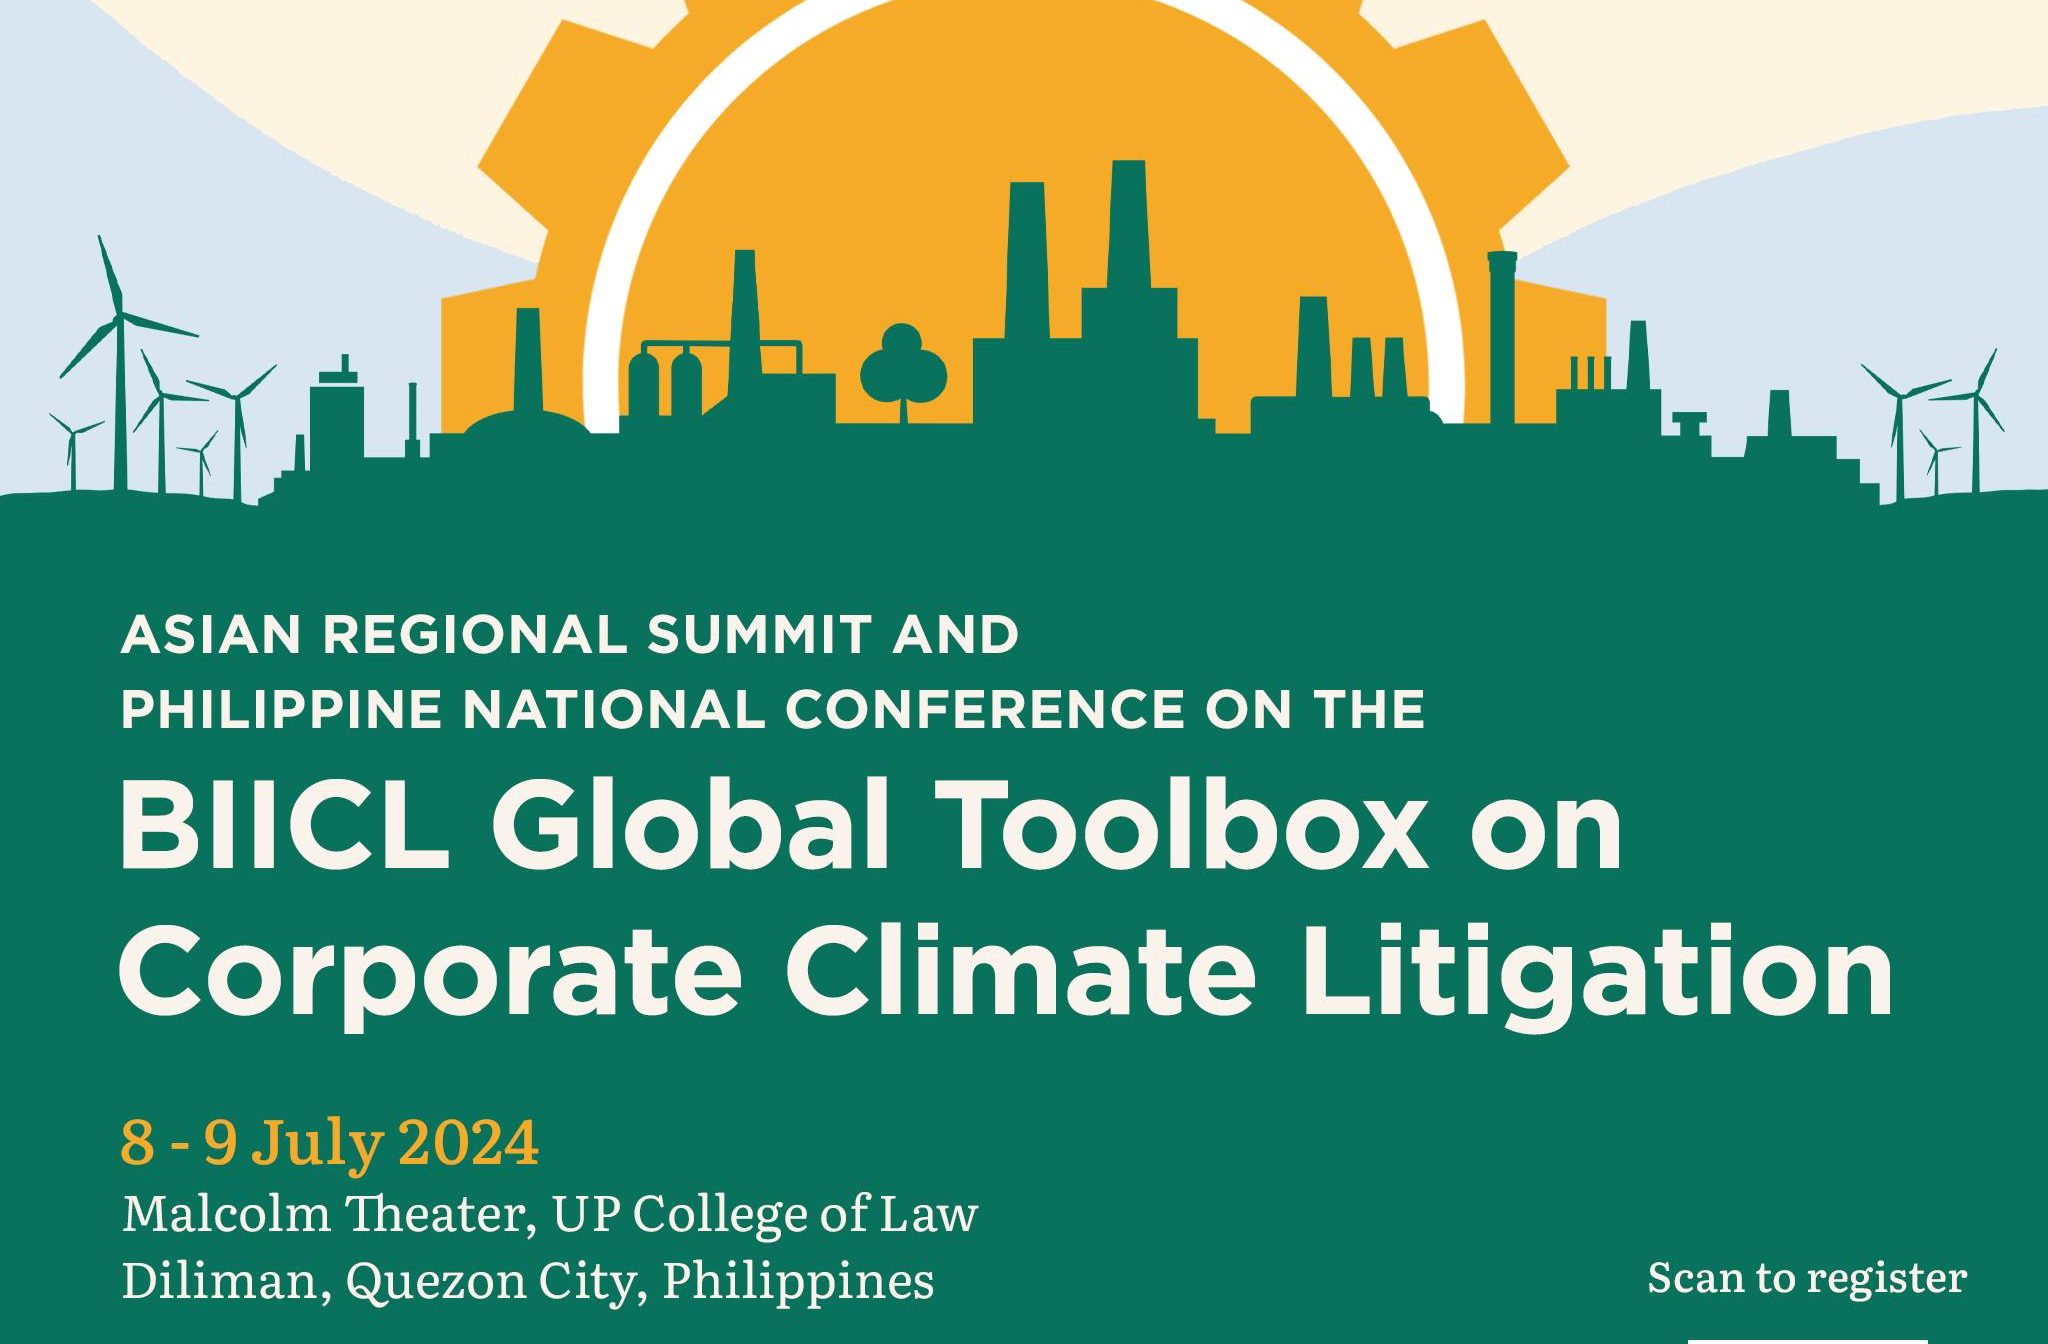 Asian Regional Summit and Philippine National Conference on the BIICL Global Toolbox on Corporate Climate Litigation